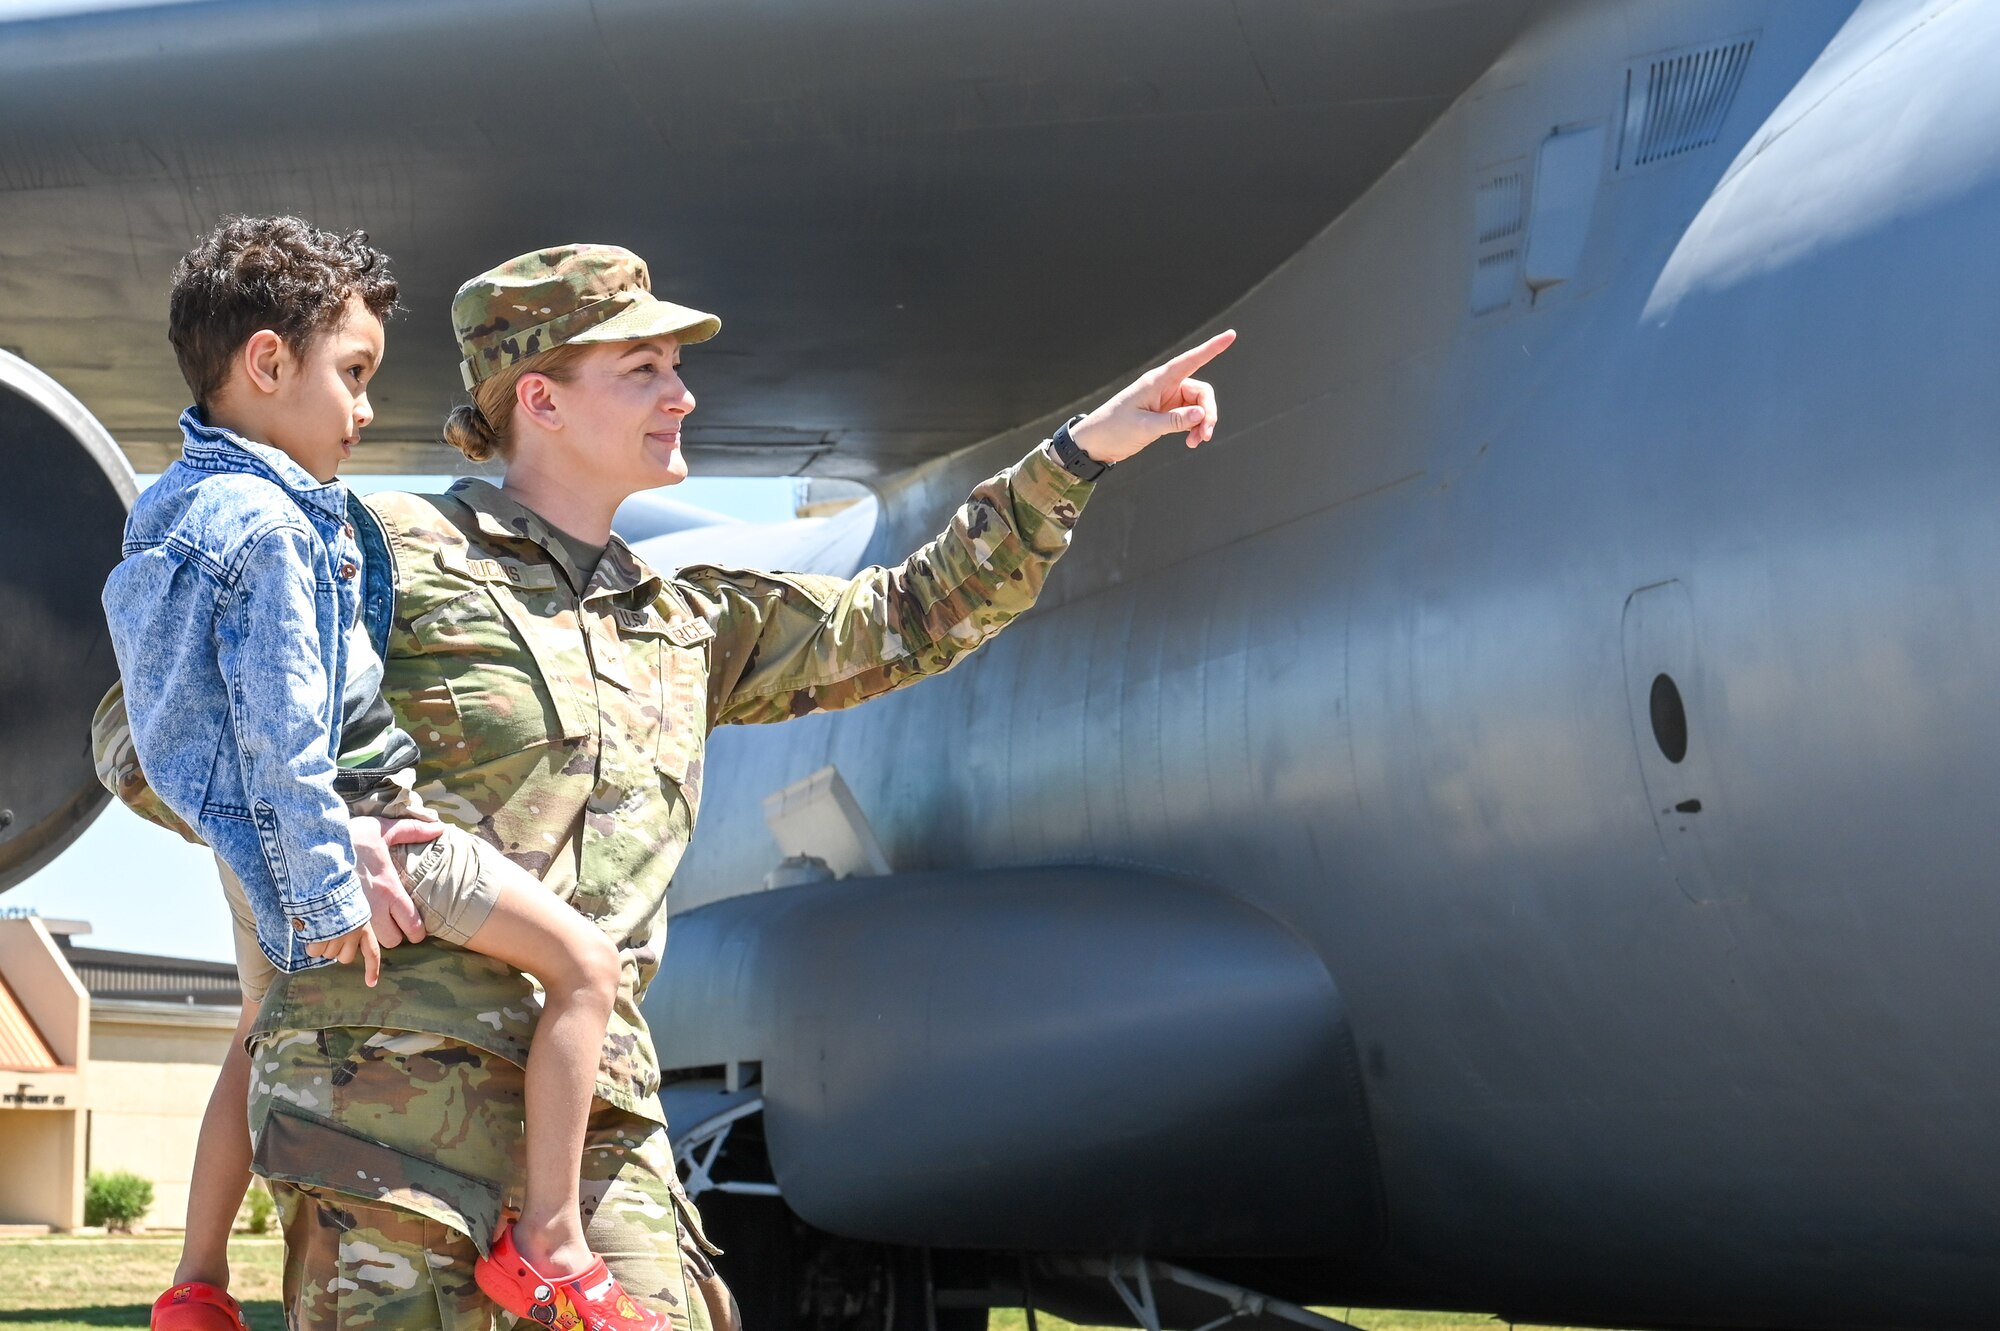 U.S. Air Force Airman 1st Class Heidi Bucins, 97th Air Mobility Wing public affairs apprentice, points to a static display with her son, Noah, at Altus Air Force Base, Oklahoma, May 4, 2023. Women make up 20.9% of the U.S. Air Force enlisted corps. (U.S. Air Force photo by Senior Airman Kayla Christenson)